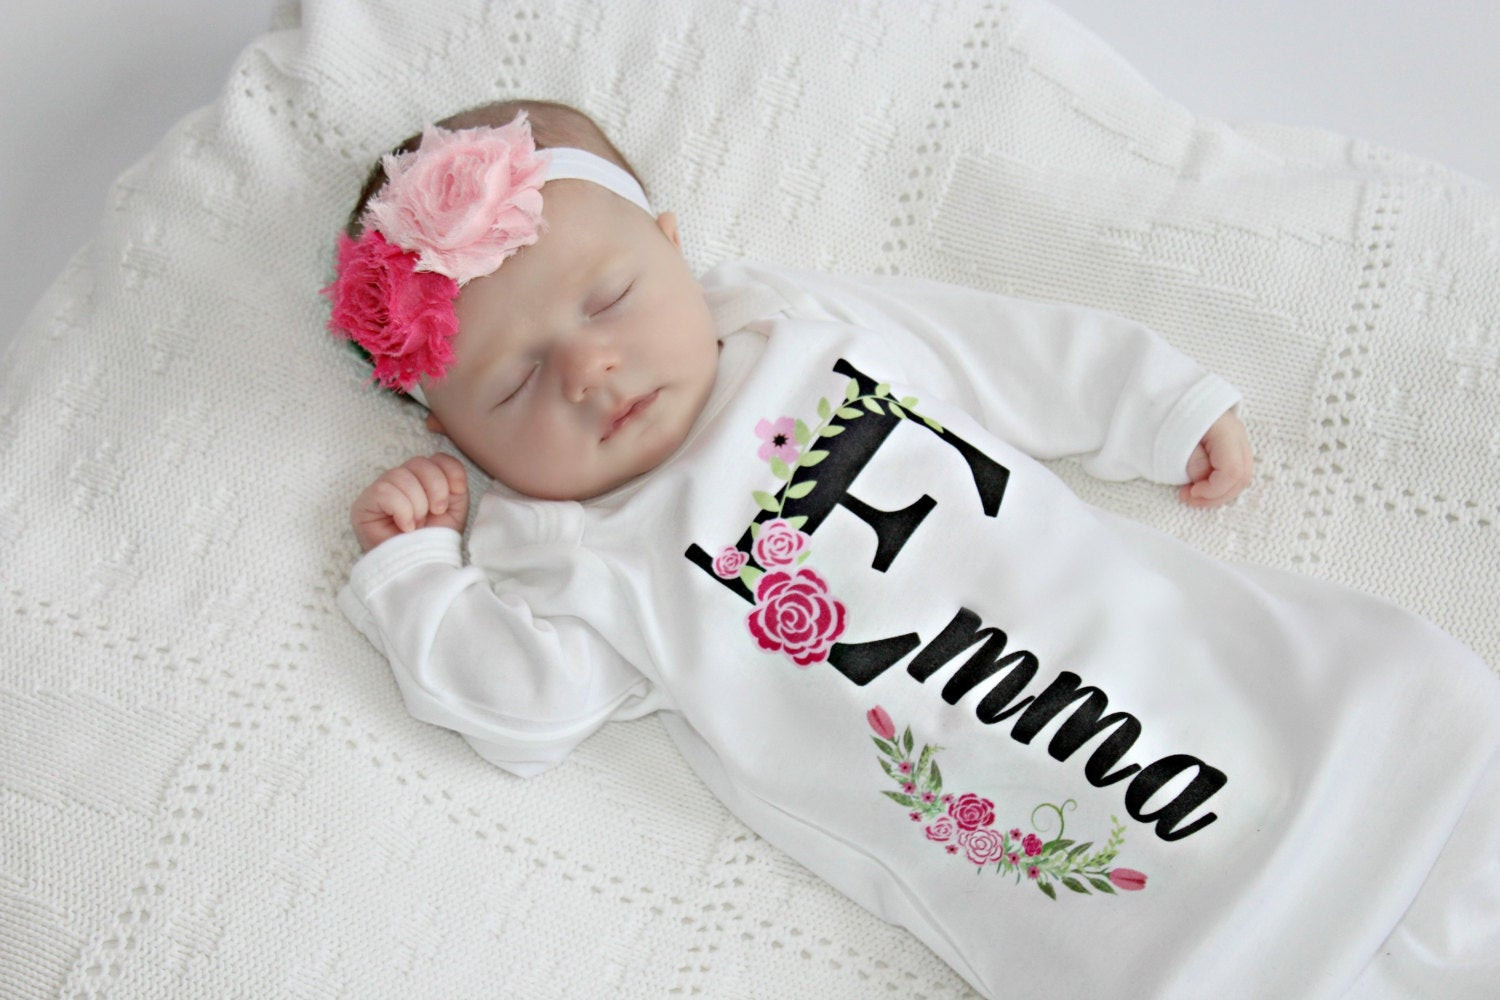 unique-new-baby-gifts-unique-personalized-baby-gift-girl-newborn-girl-ing-home-of-unique-new-baby-gifts.jpg